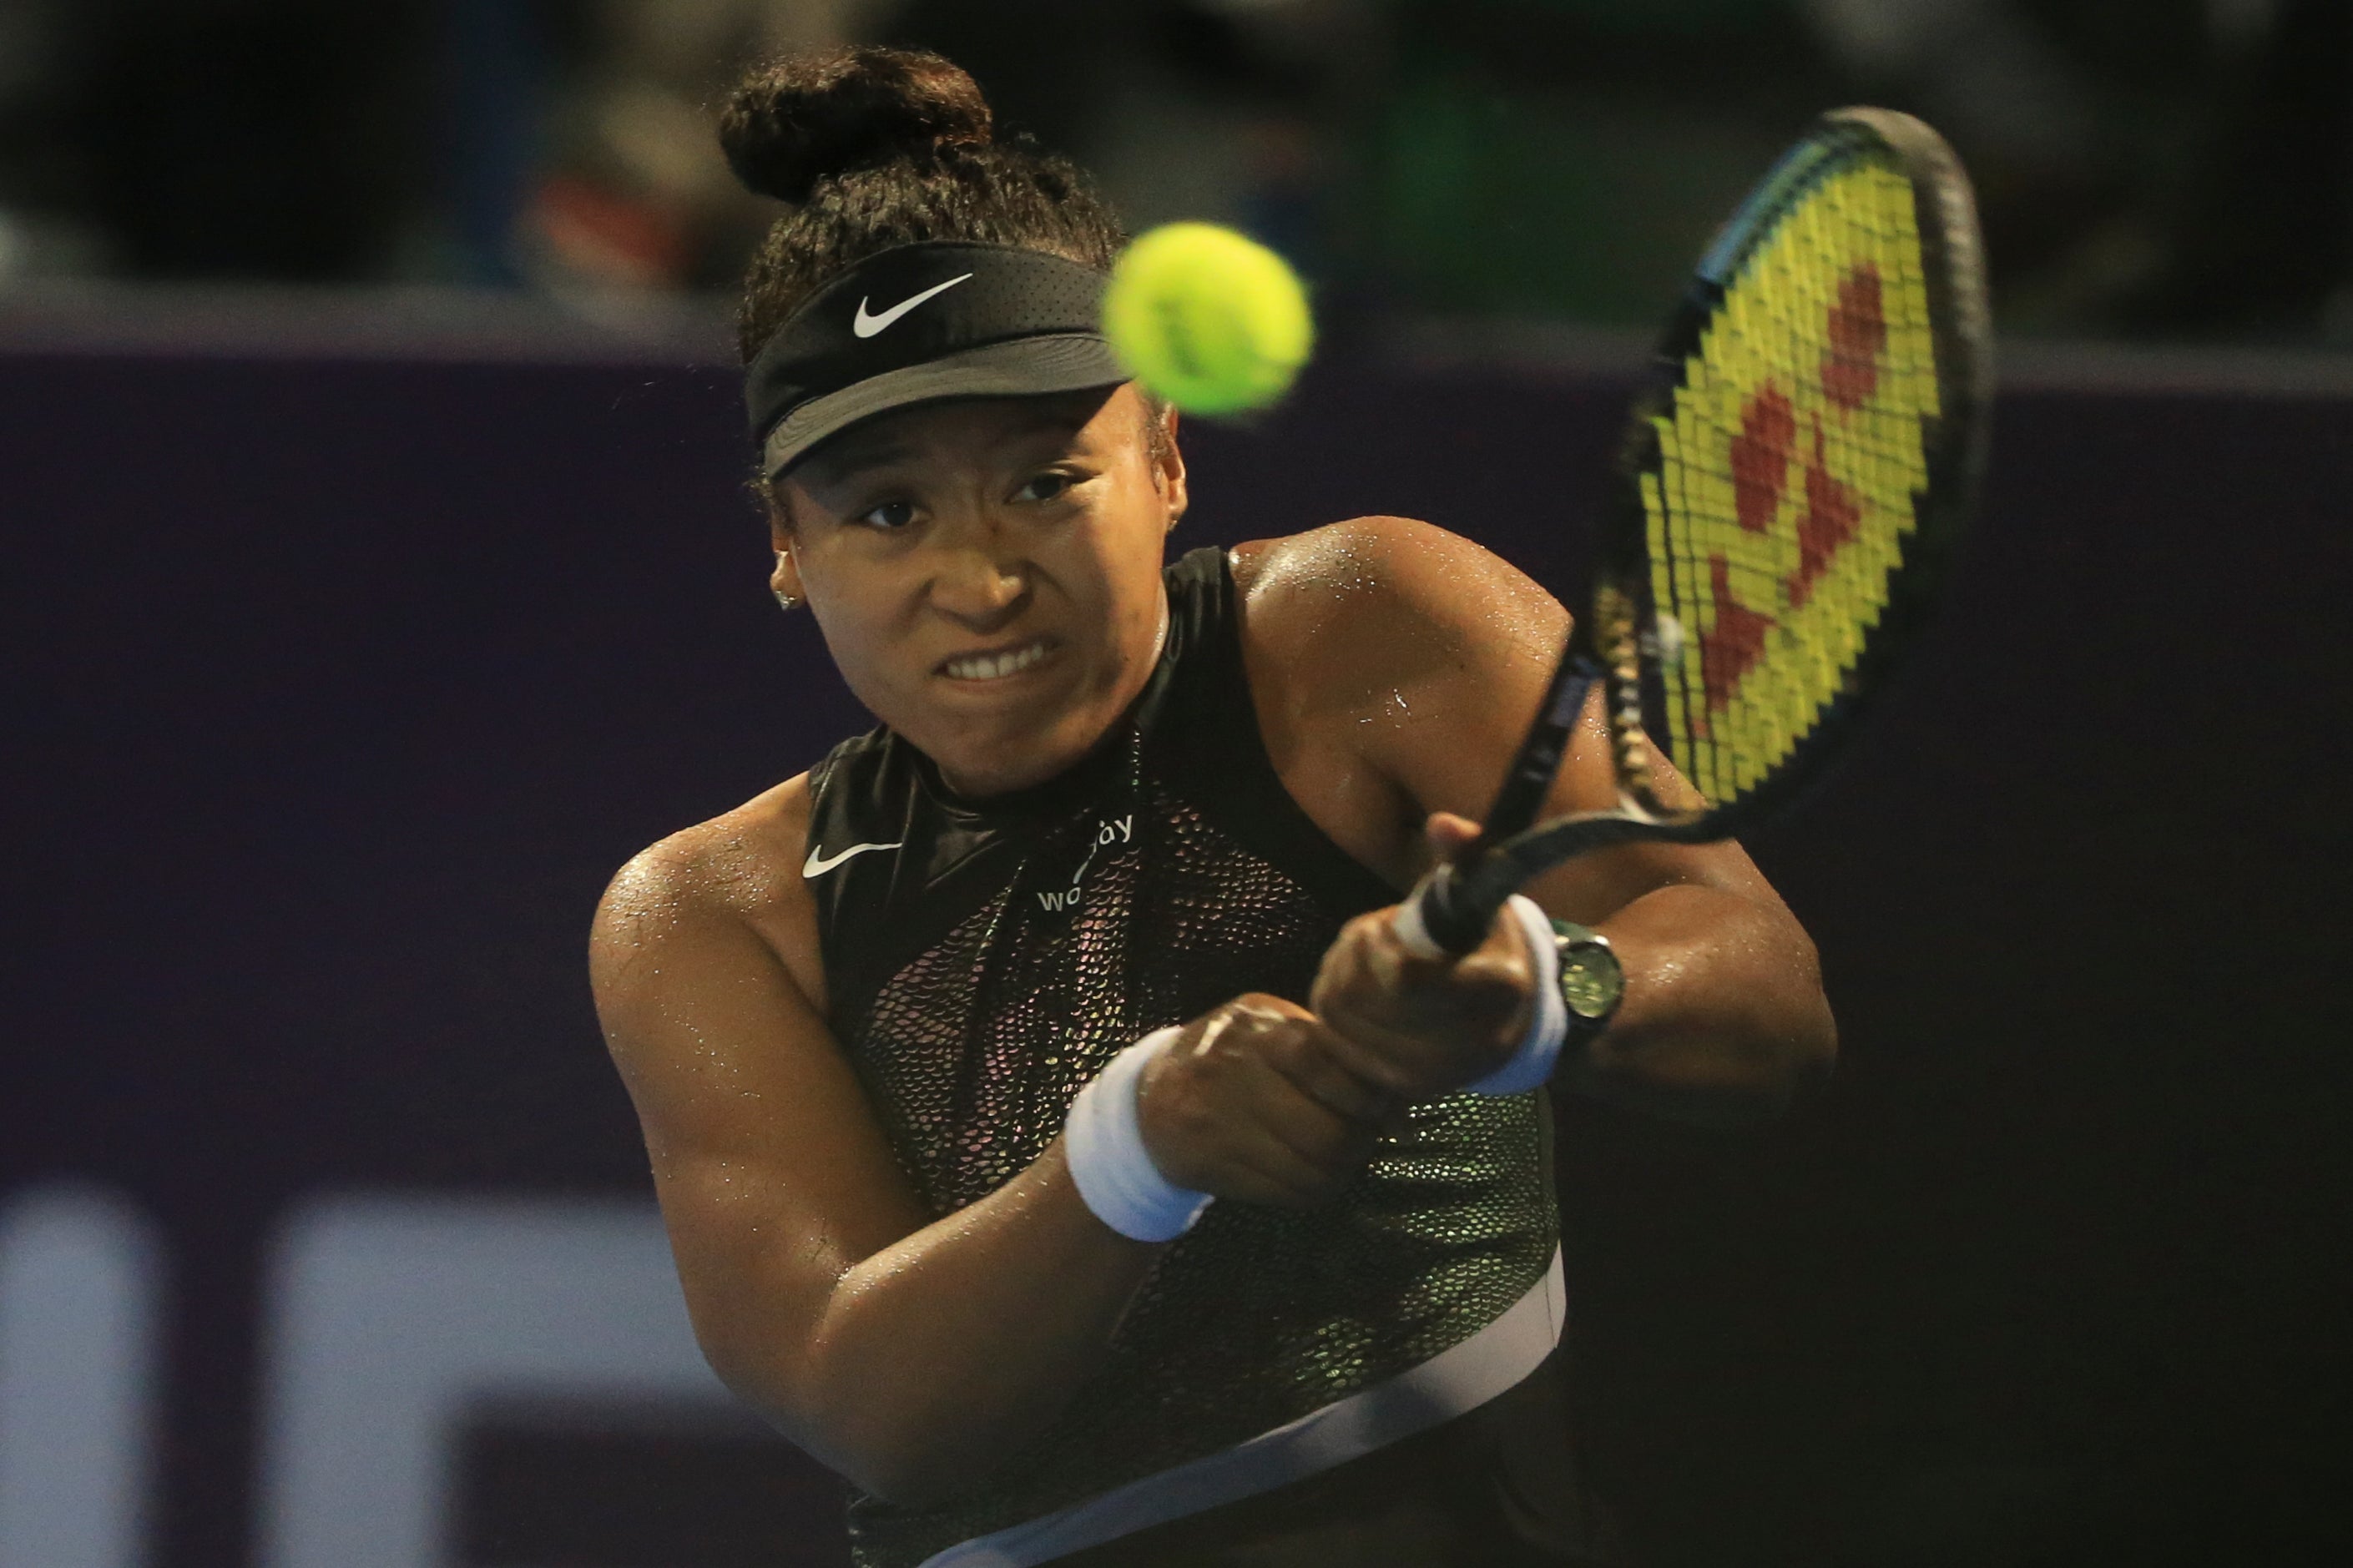 Naomi Osaka defeated Petra Martic in straight sets at the Qatar Open